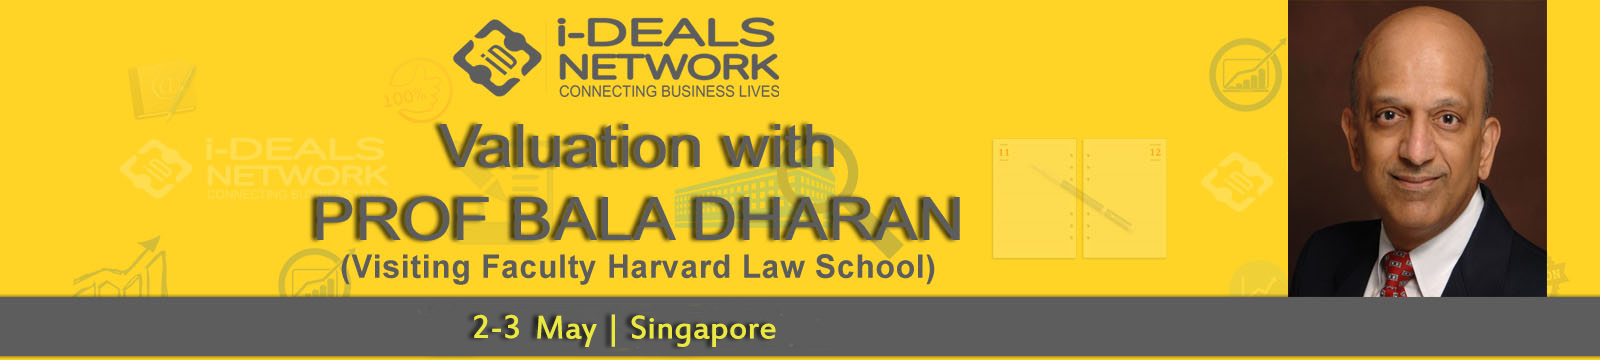 Valuation with Prof Bala Dharan Visiting Faculty of Harvard Law School, Singapore, Central, Singapore